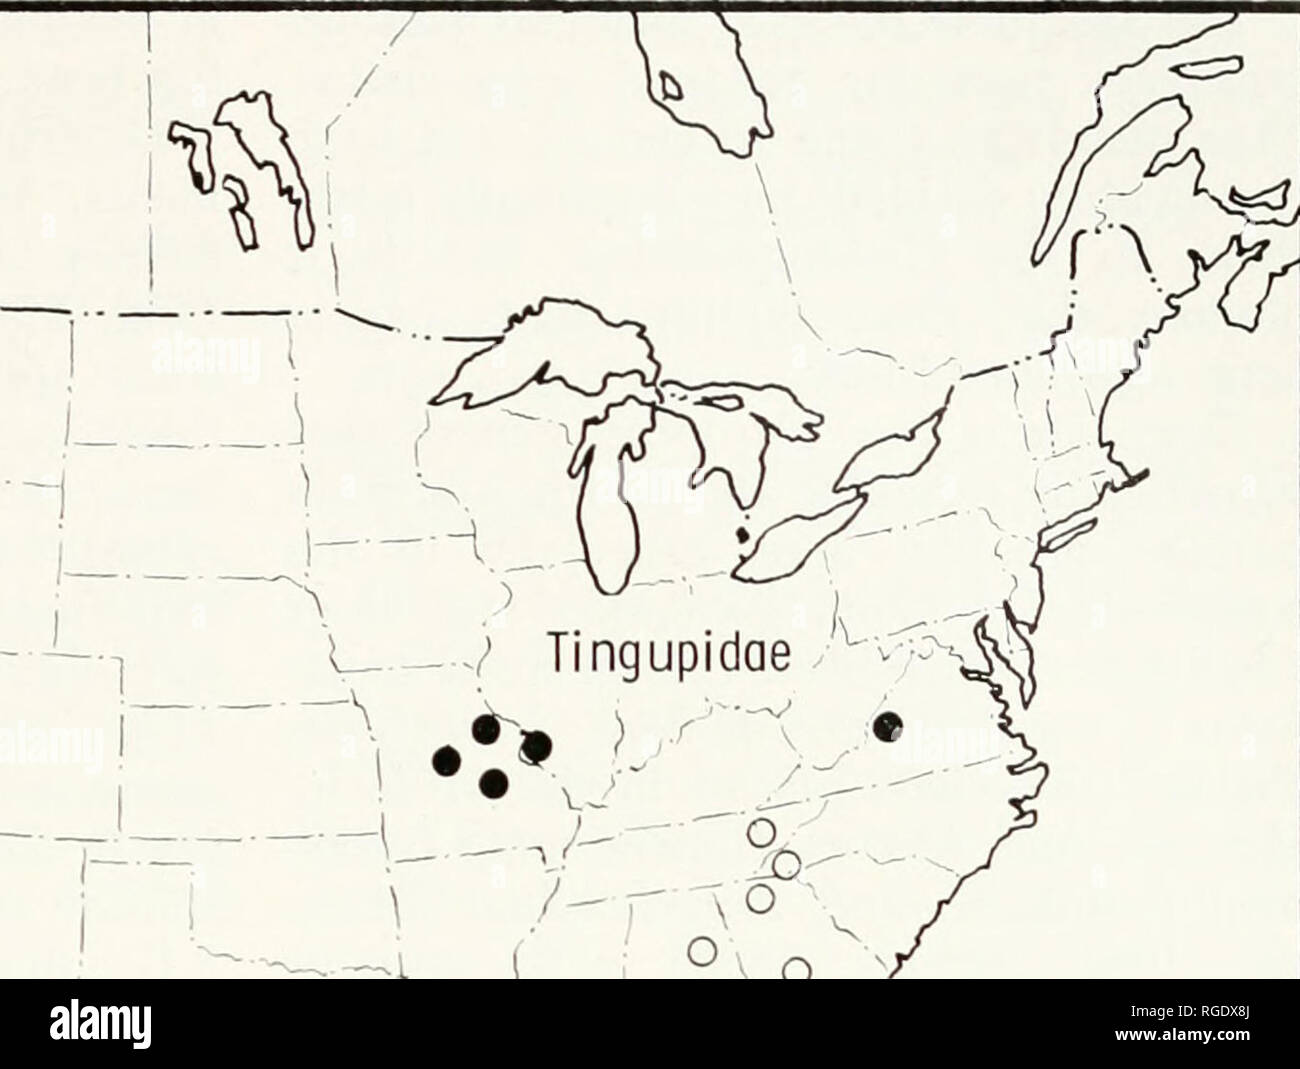 . Bulletin of the Museum of Comparative Zoology at Harvard College. Zoology. ^'-, i . - â 7 Tingupidae /^^'^&gt;^ â y ^ Map 16 ^- V ) Qo 6 ^ Branneriidae &gt; Map 16. United States, showing distribution of the families Tingupidoe (dots), Rhiscosomididae (triangles), and Branneriidae (circles). like, with scalelike setae and a posterior flagelliforni branch. Telopodites (T, Fig. 454) simple, lobelike, well musciilarized from tracheal apodeme and coxae. Coxae of legs 10 enlarged, with glands. Posterior gonopods: as described for genus (Figs. 457, 458). Notes. The gonopods of R. acovescor do n Stock Photo